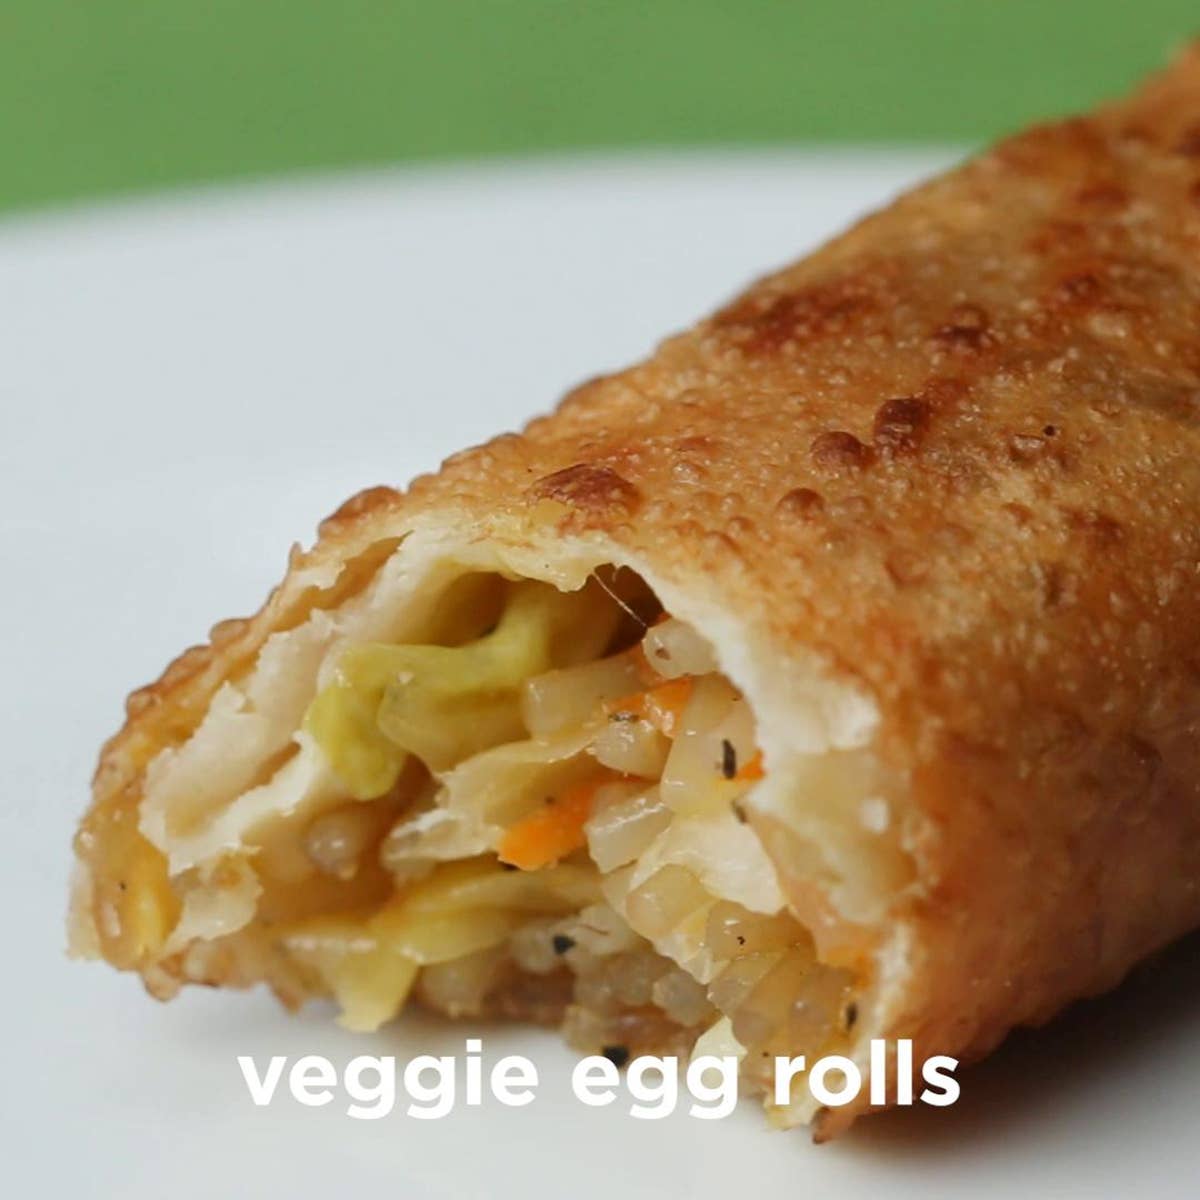 Takeout-Style Veggie Egg Rolls